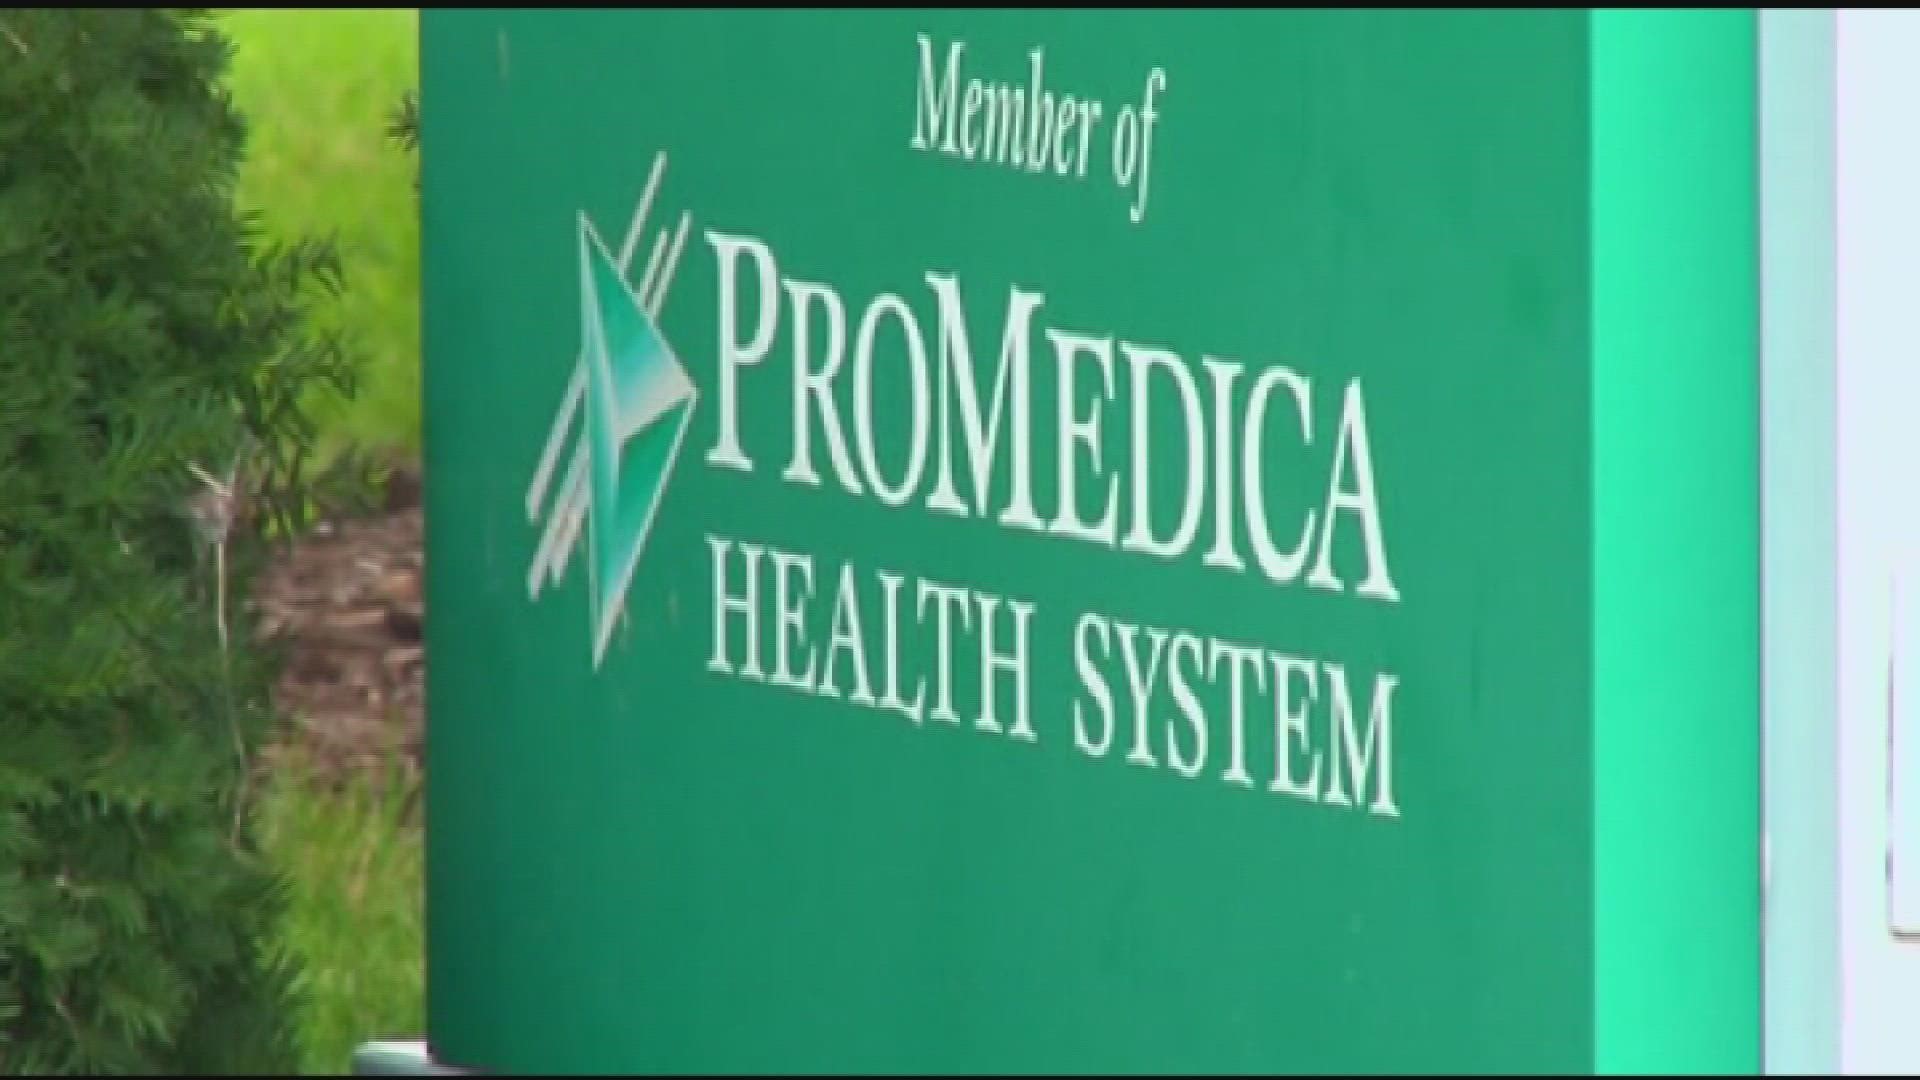 The healthcare company announced it will layoff approximately one percent of its employees.